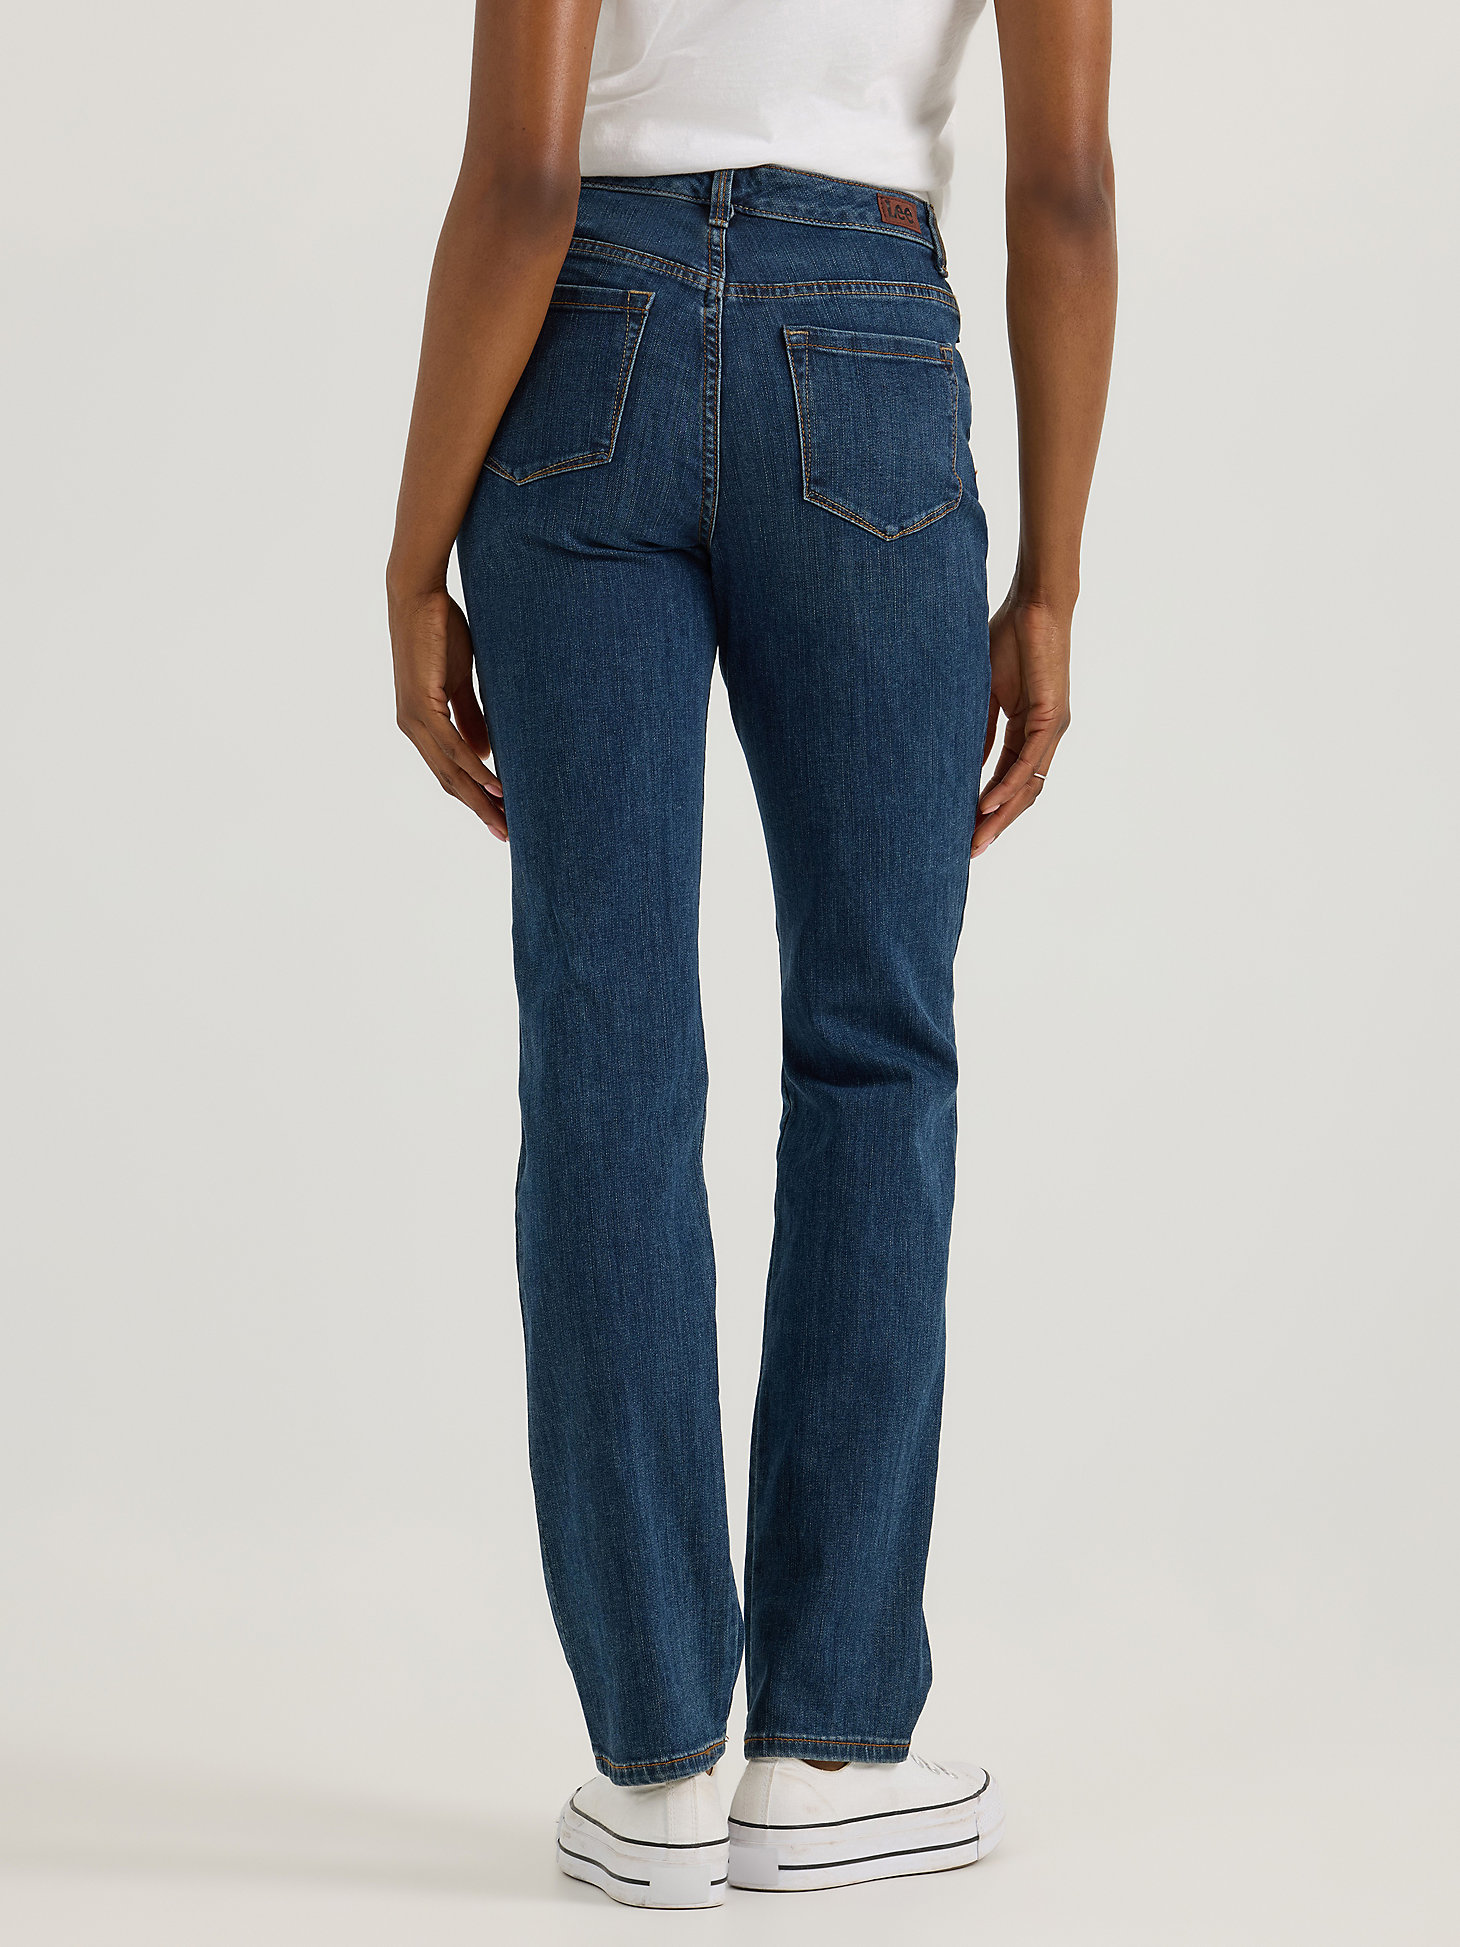 Women’s Instantly Slims Relaxed Fit Straight Leg Jean Classic Fit in Ellis alternative view 2